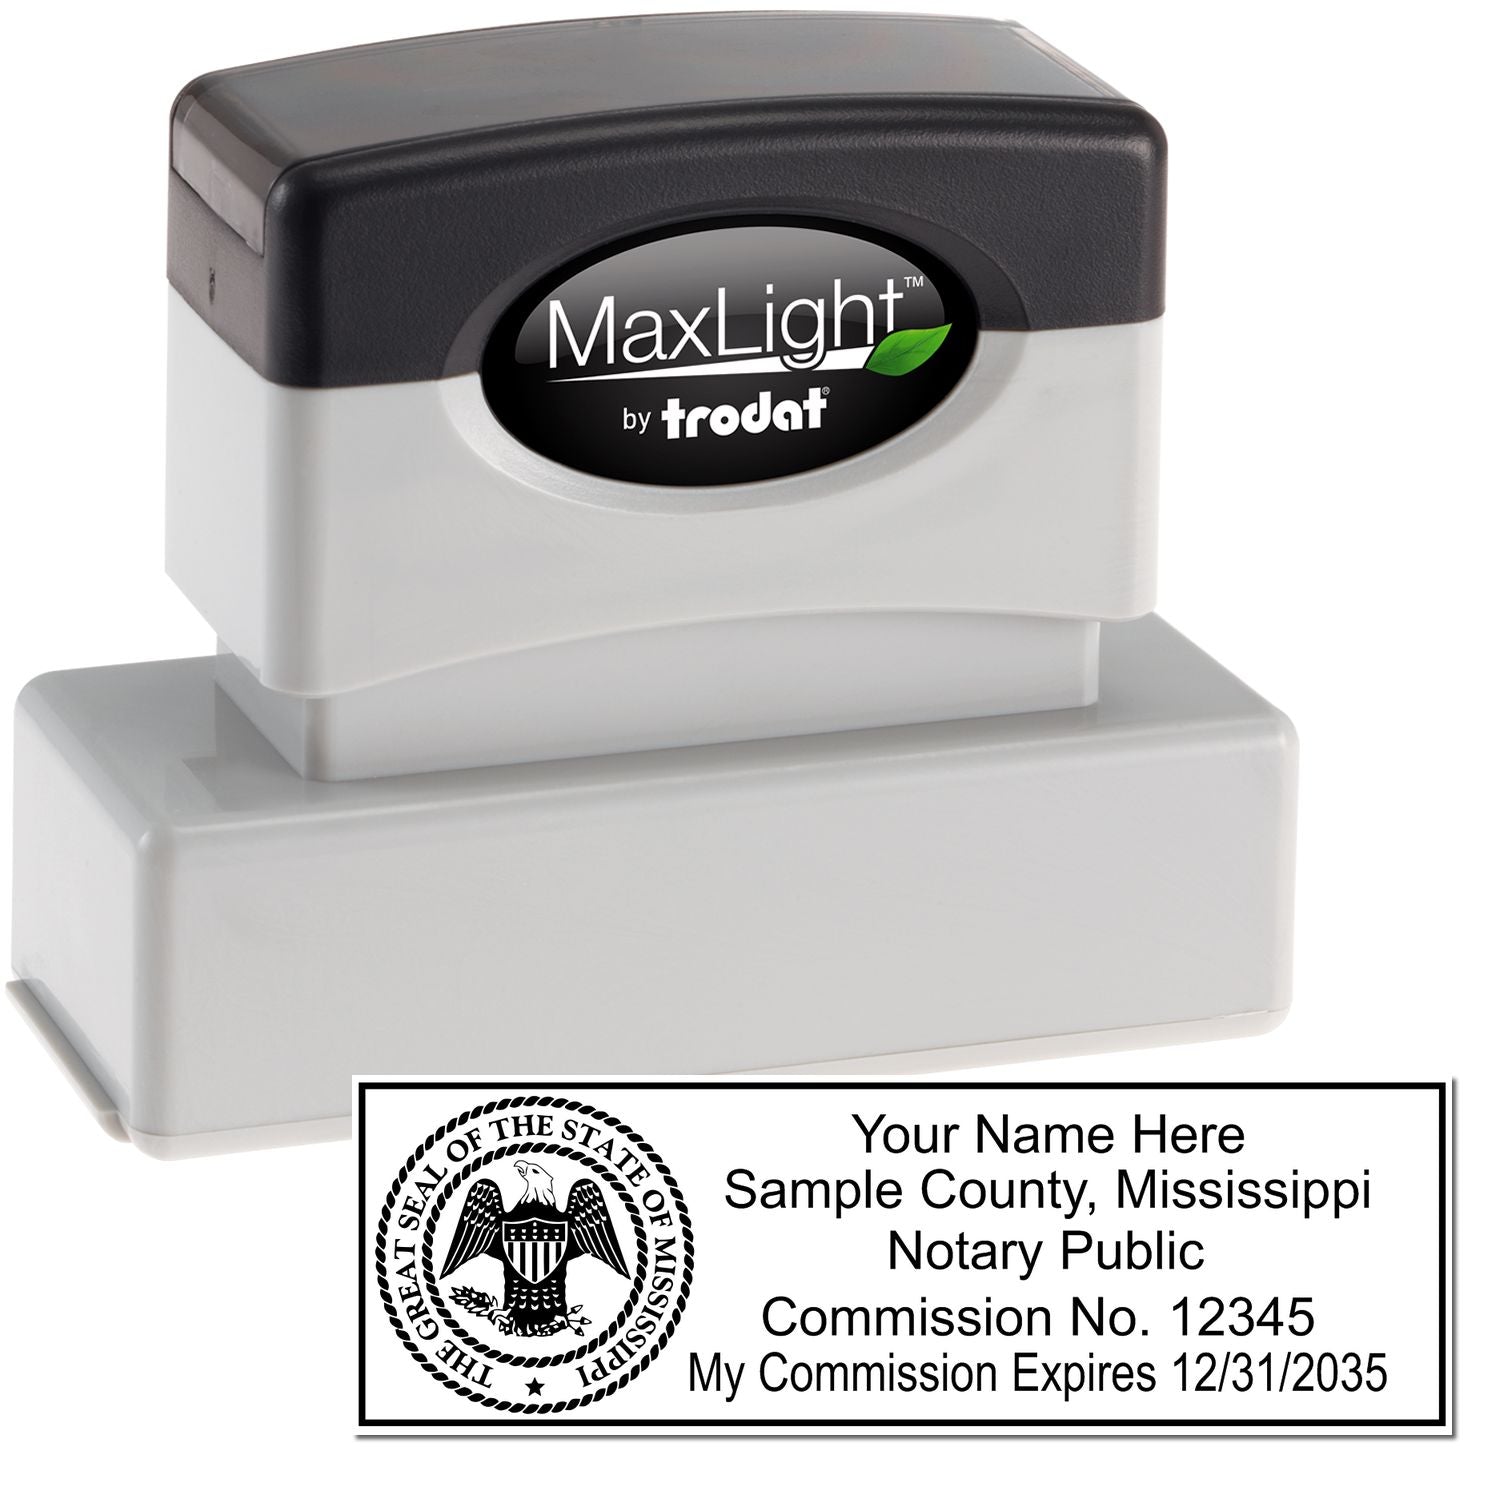 The main image for the MaxLight Premium Pre-Inked Mississippi State Seal Notarial Stamp depicting a sample of the imprint and electronic files